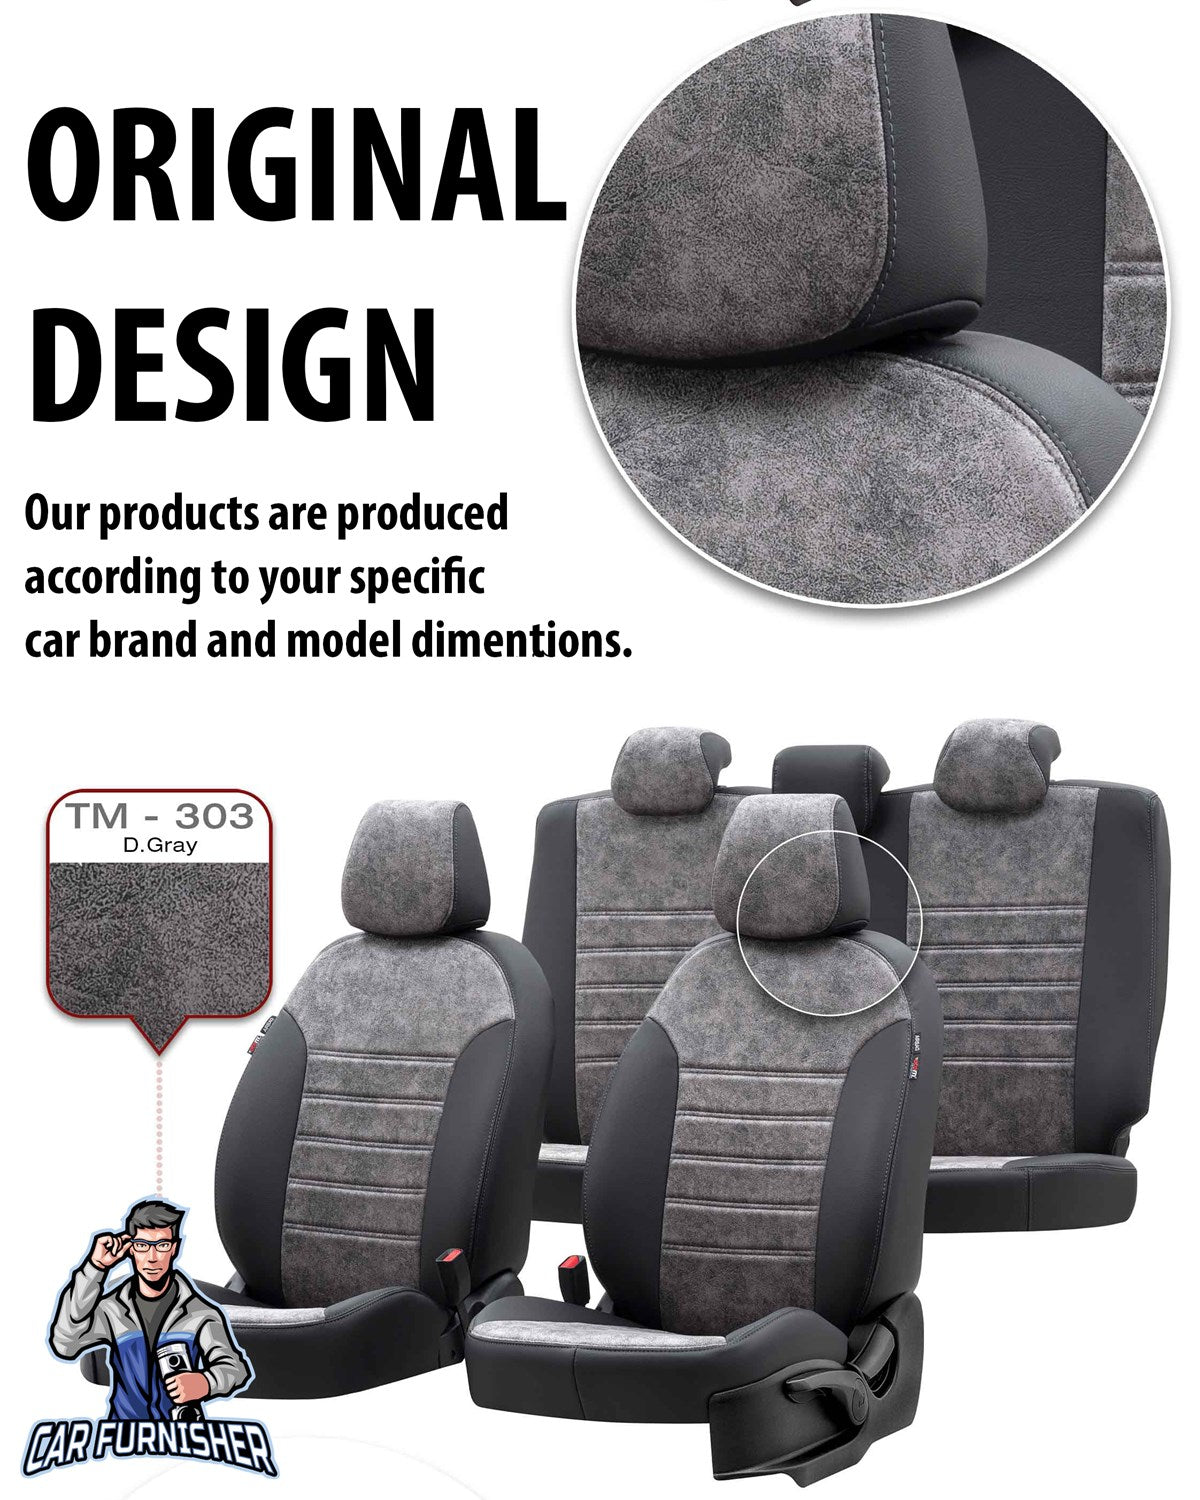 Volkswagen Caddy Seat Cover Milano Suede Design Smoked Black Leather & Suede Fabric